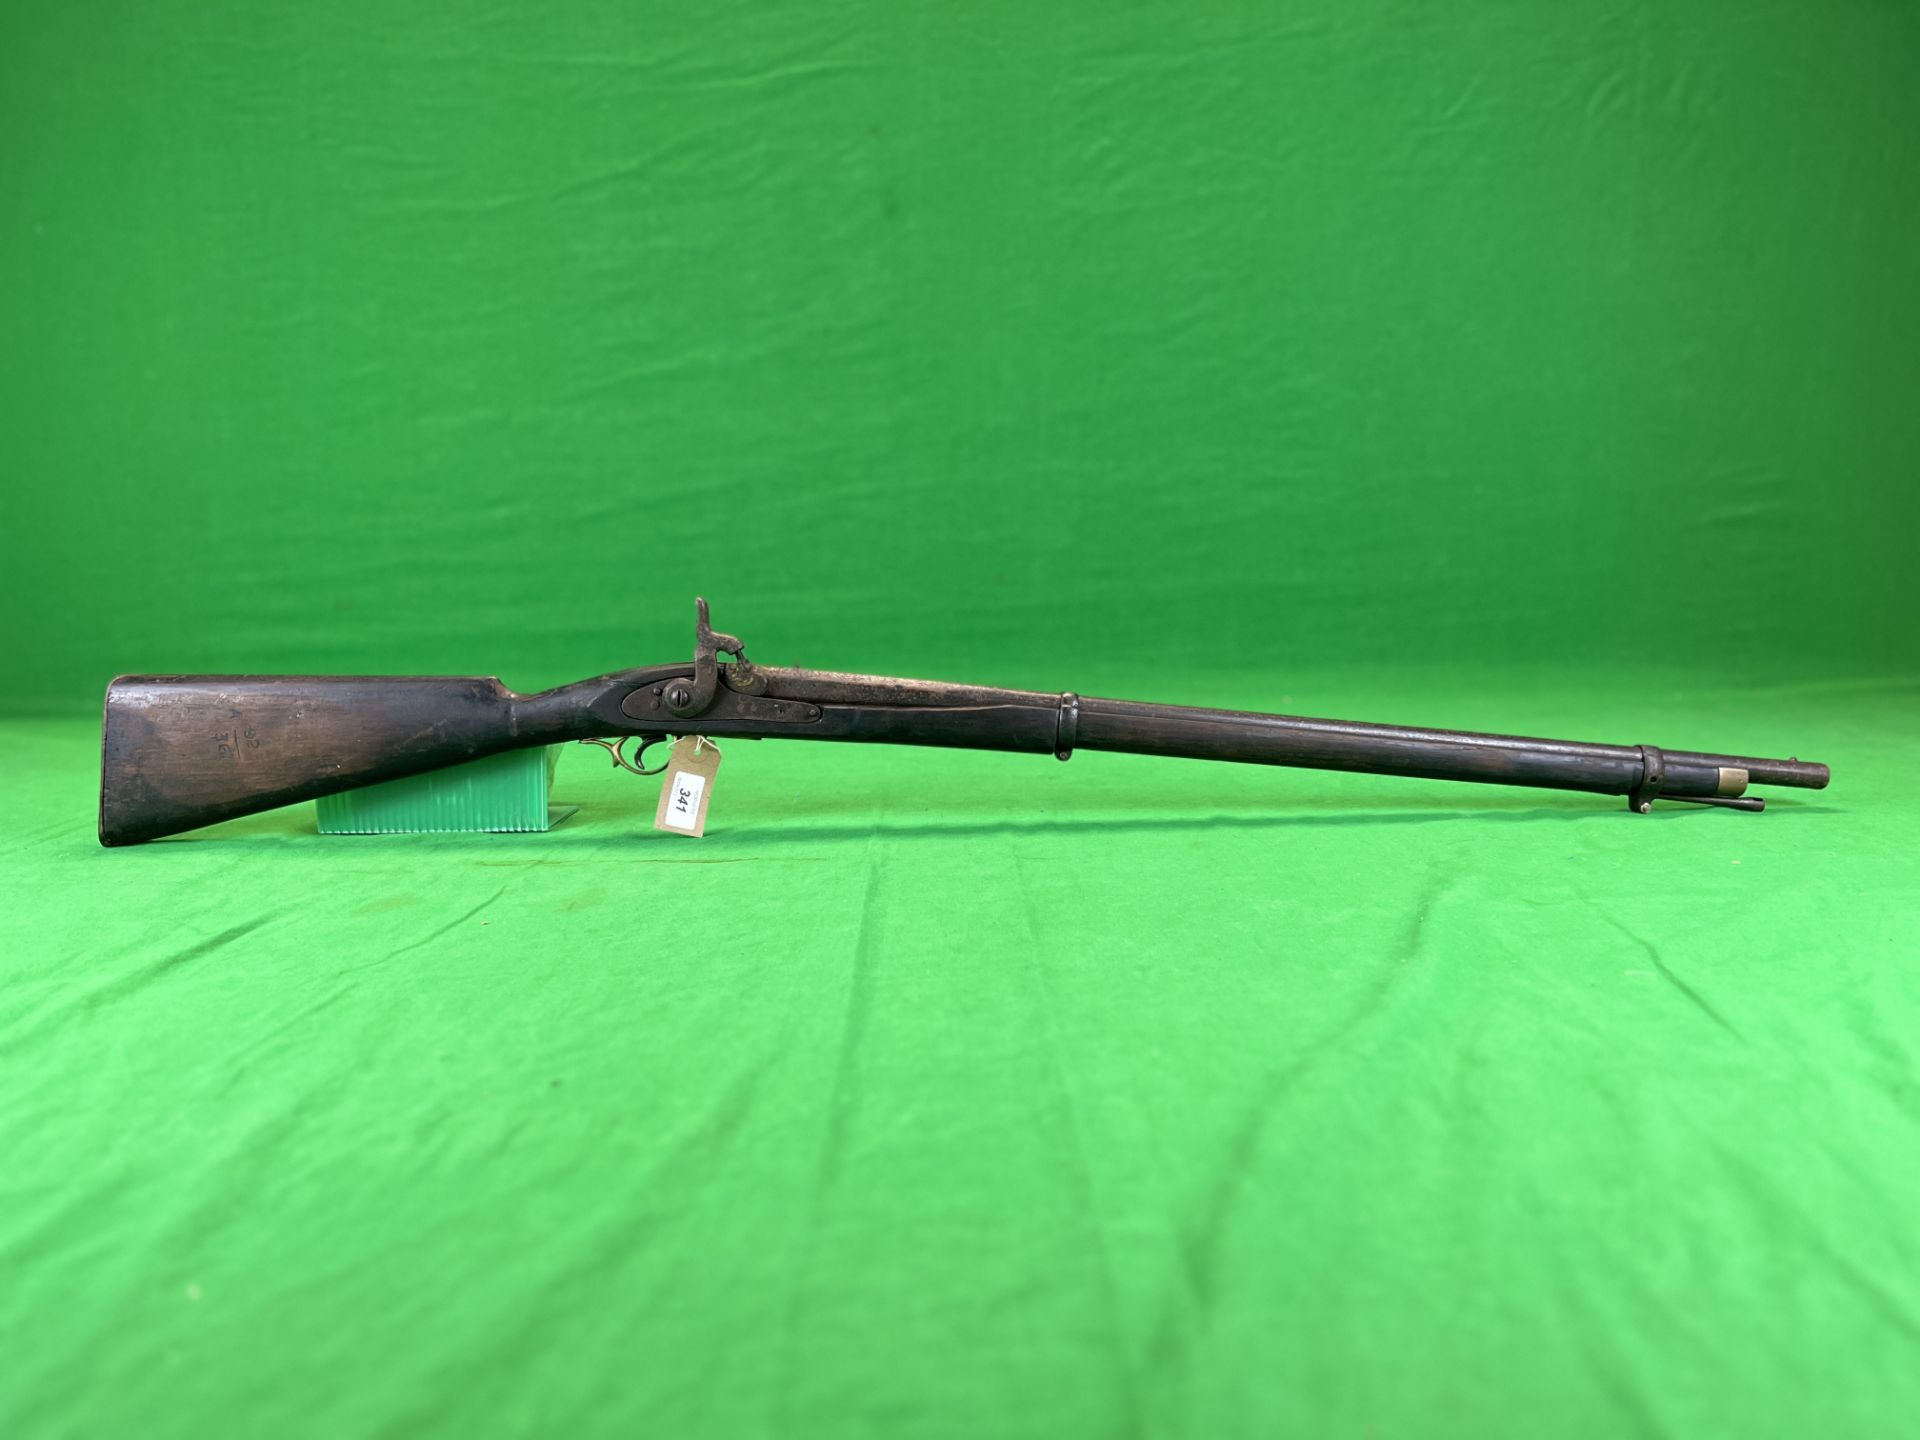 AN ANTIQUE PERCUSSION RIFLE WITH LOADING ROD - (ALL GUNS TO BE INSPECTED AND SERVICED BY QUALIFIED